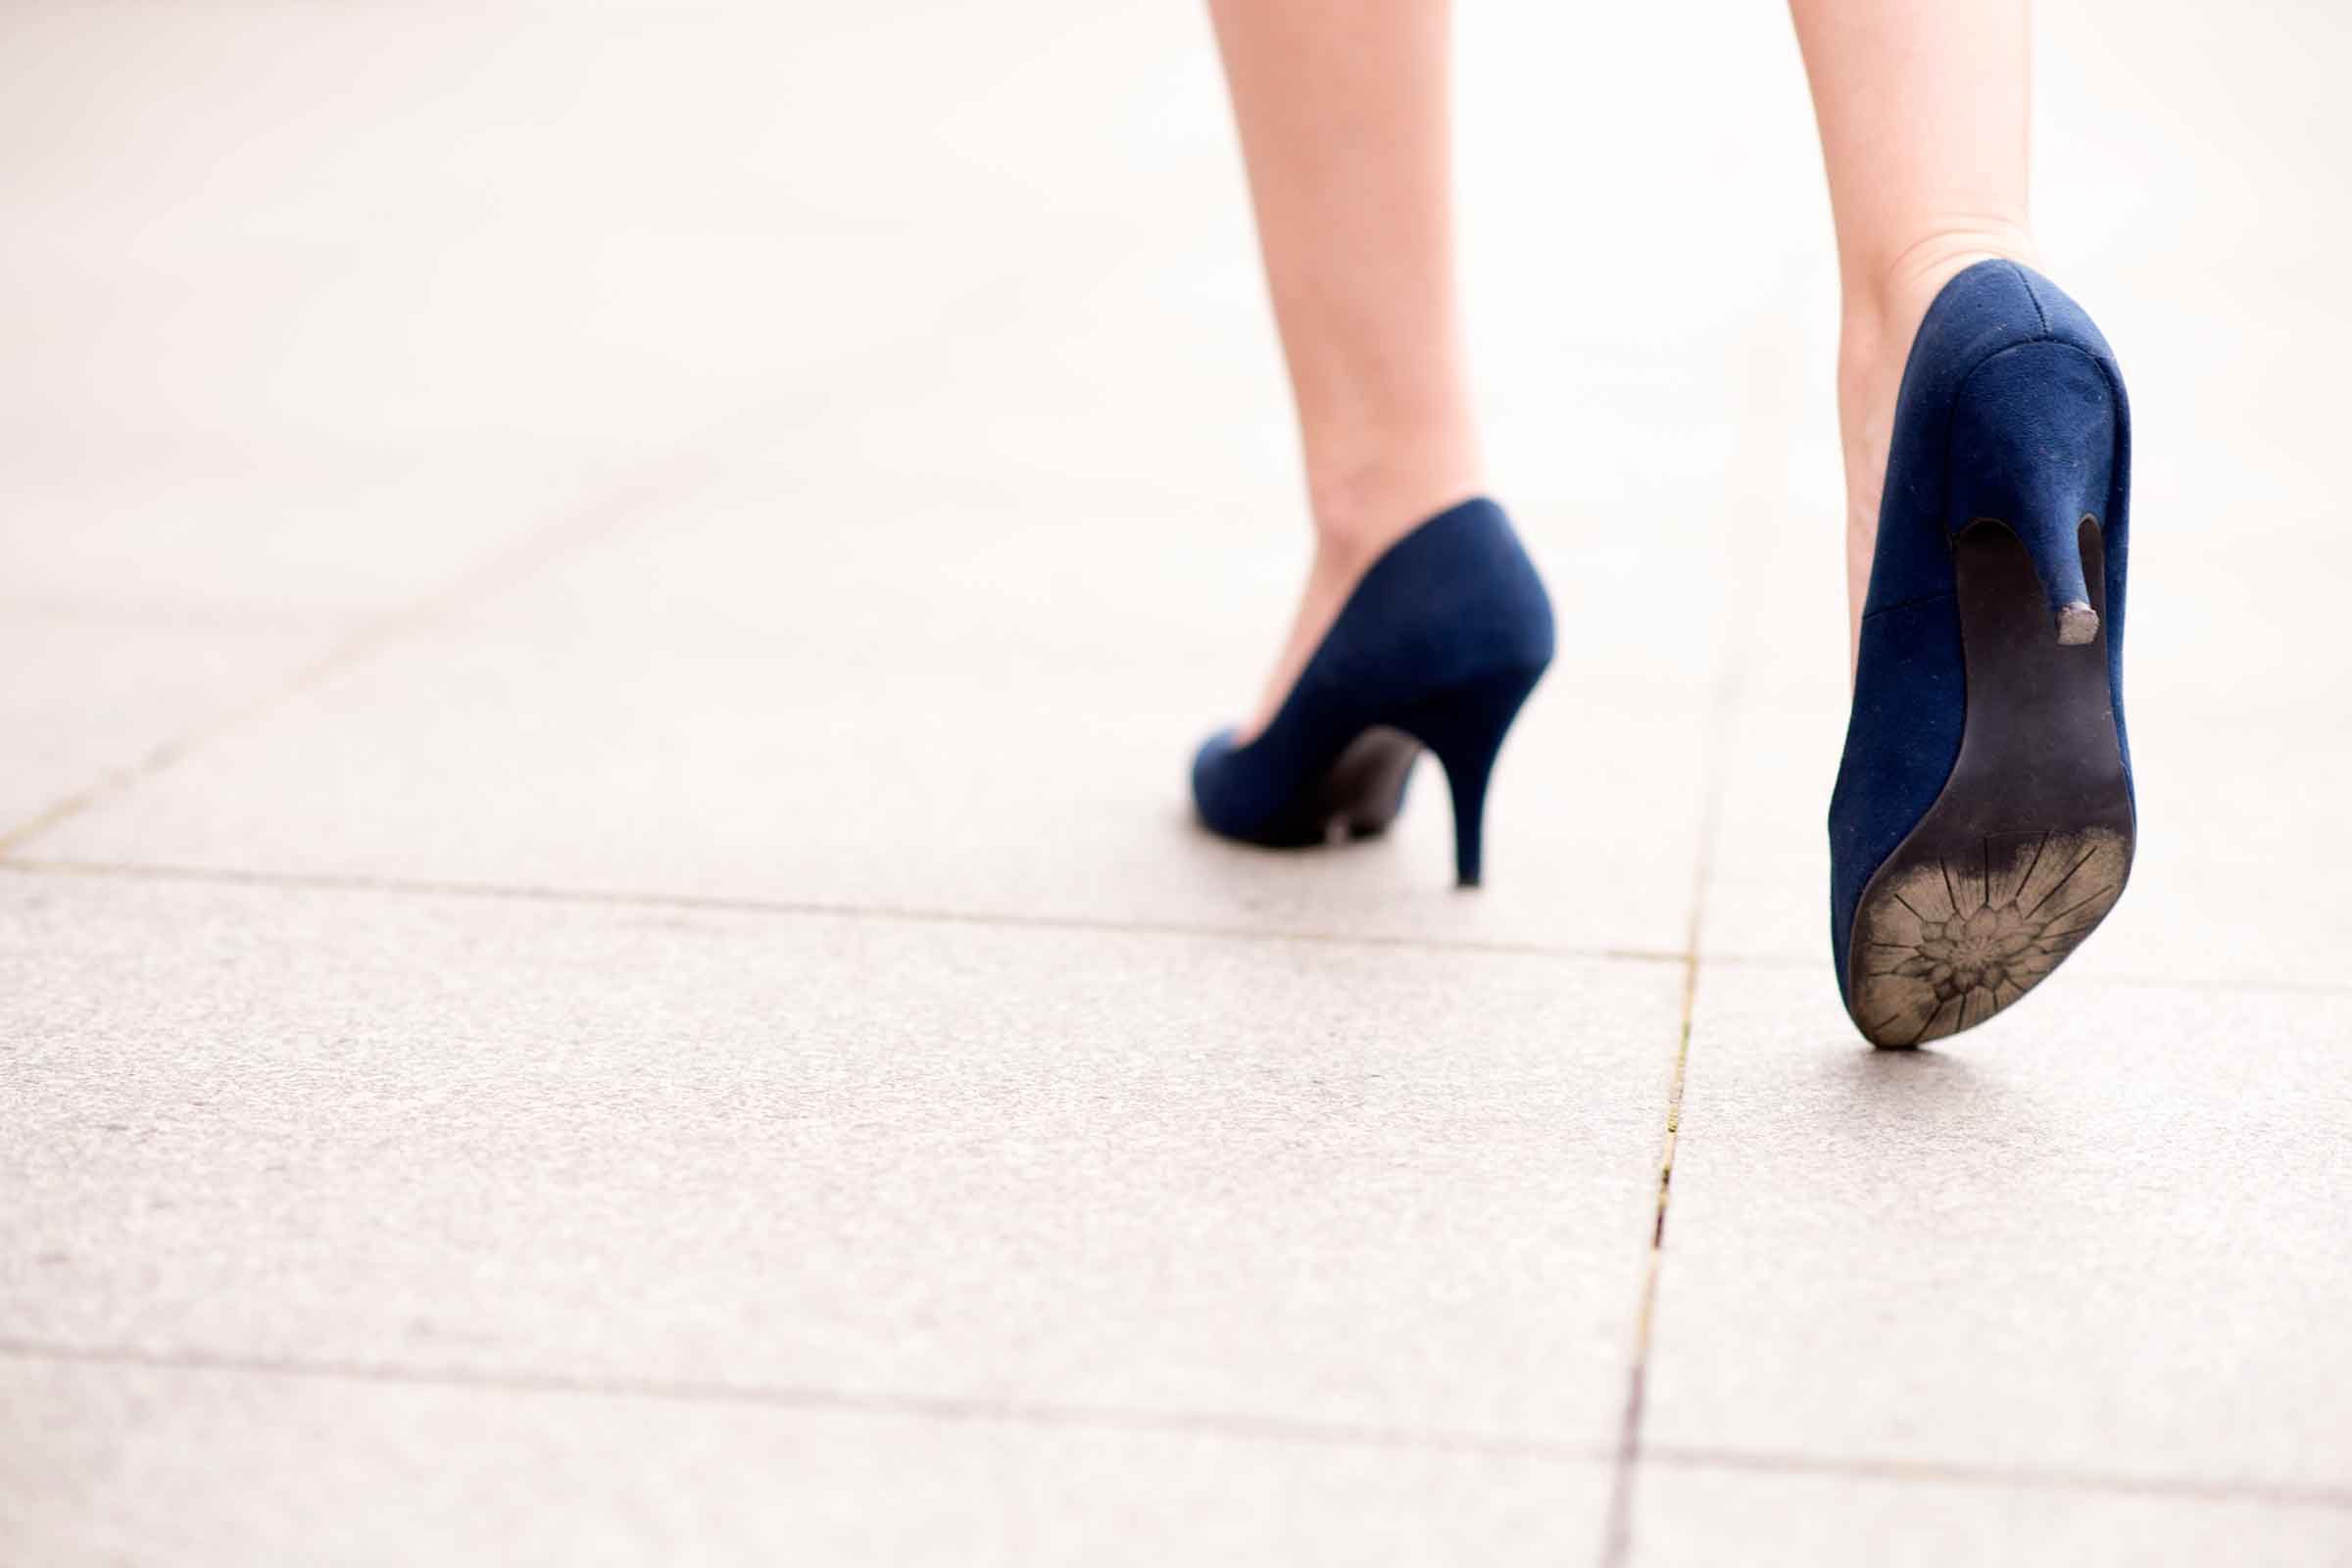 How Wearing High Heels Causes Pain The Healthy